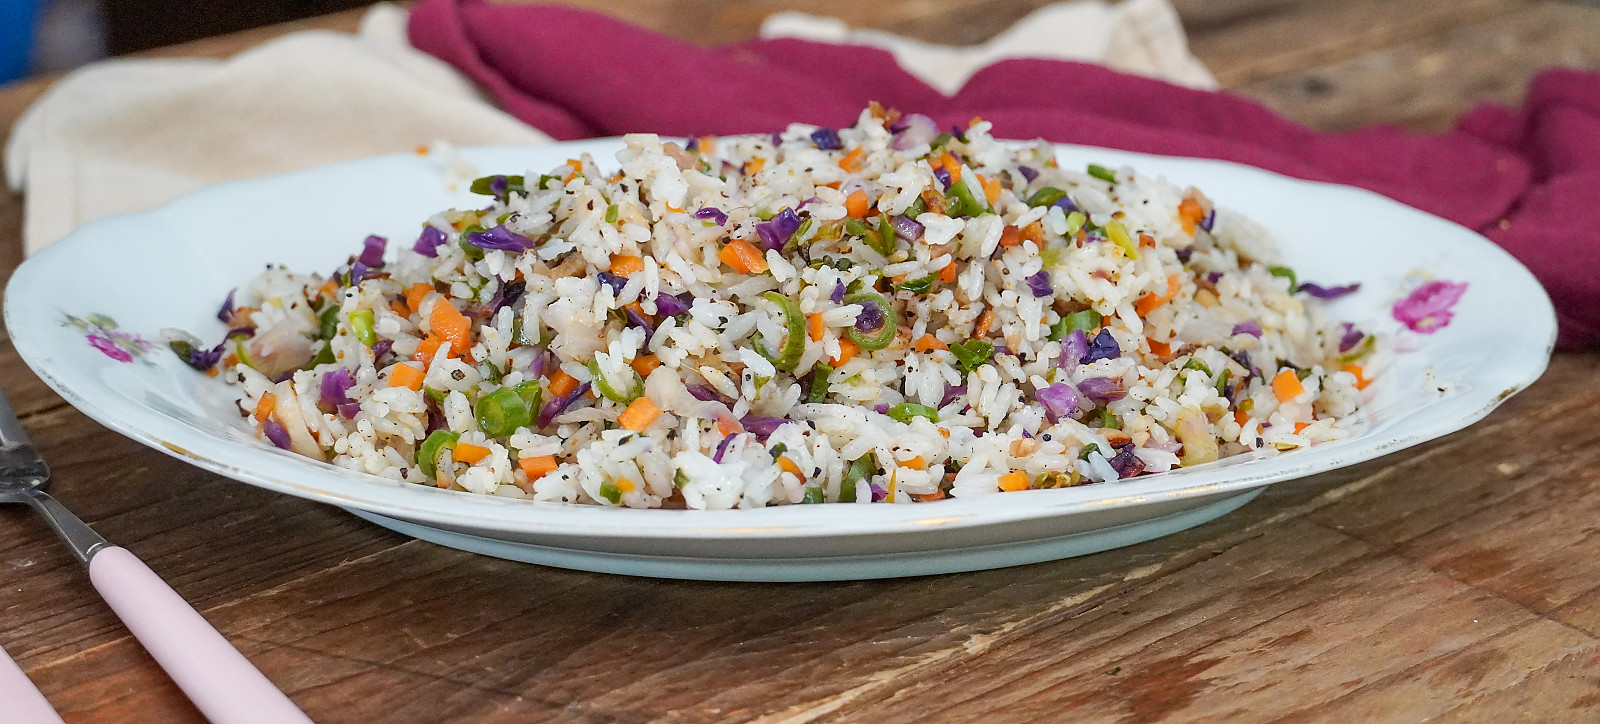 Chinese Vegetable Fried Rice With Red Cabbage/ Purple Cabbage